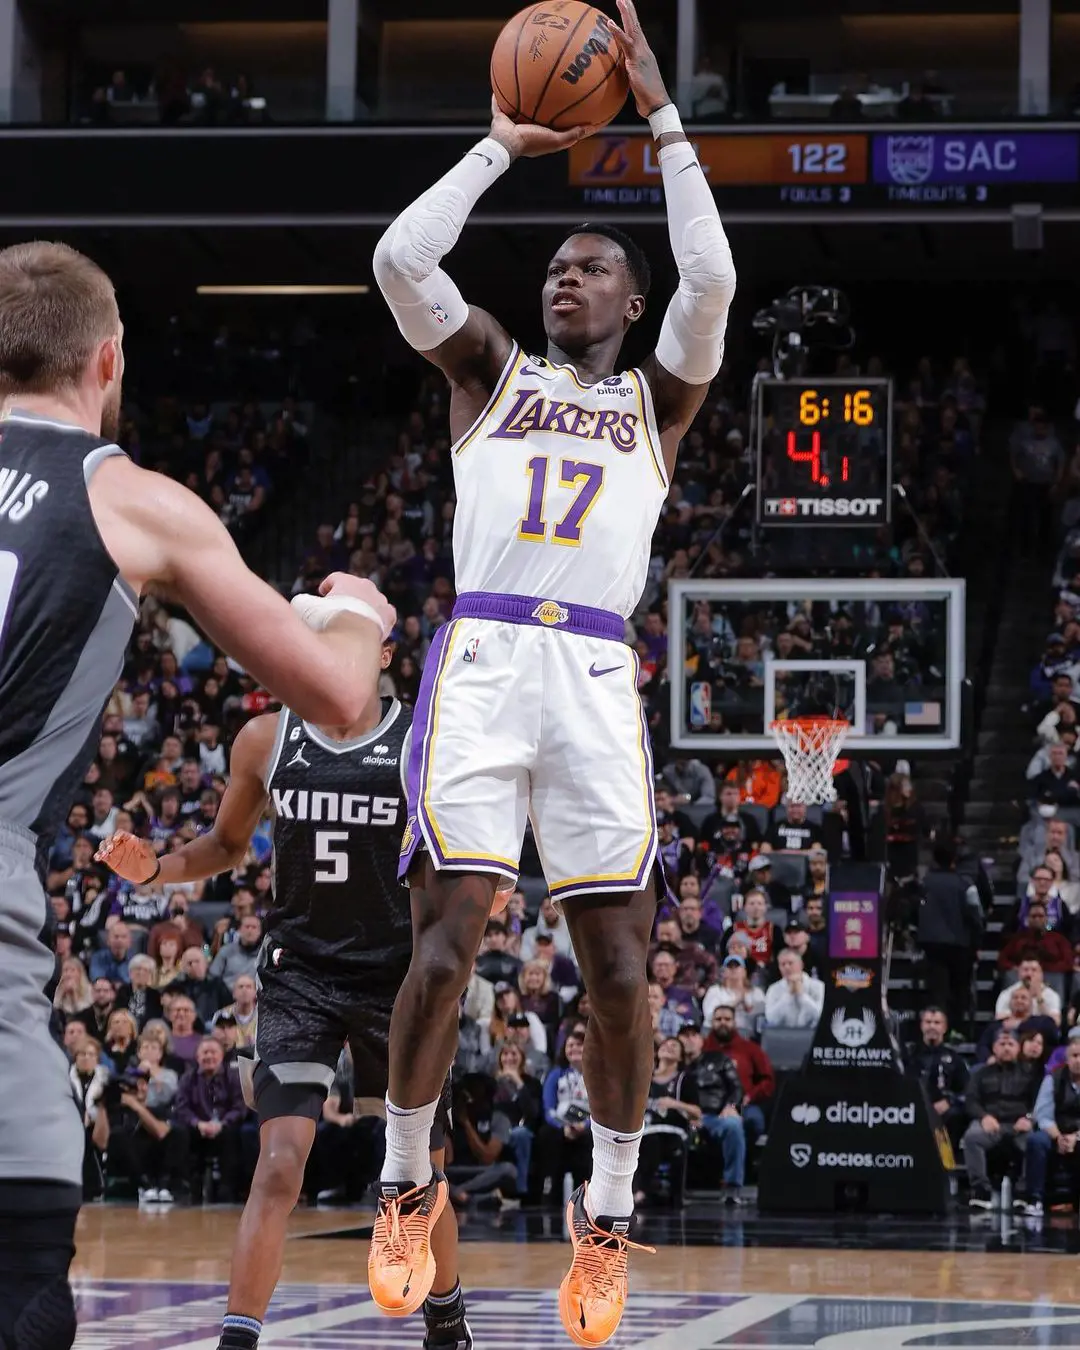 Dennis Schroder competing in the games against Sacramento Kings at Golden 1 Center Sacramento Kings on January 8, 2023.